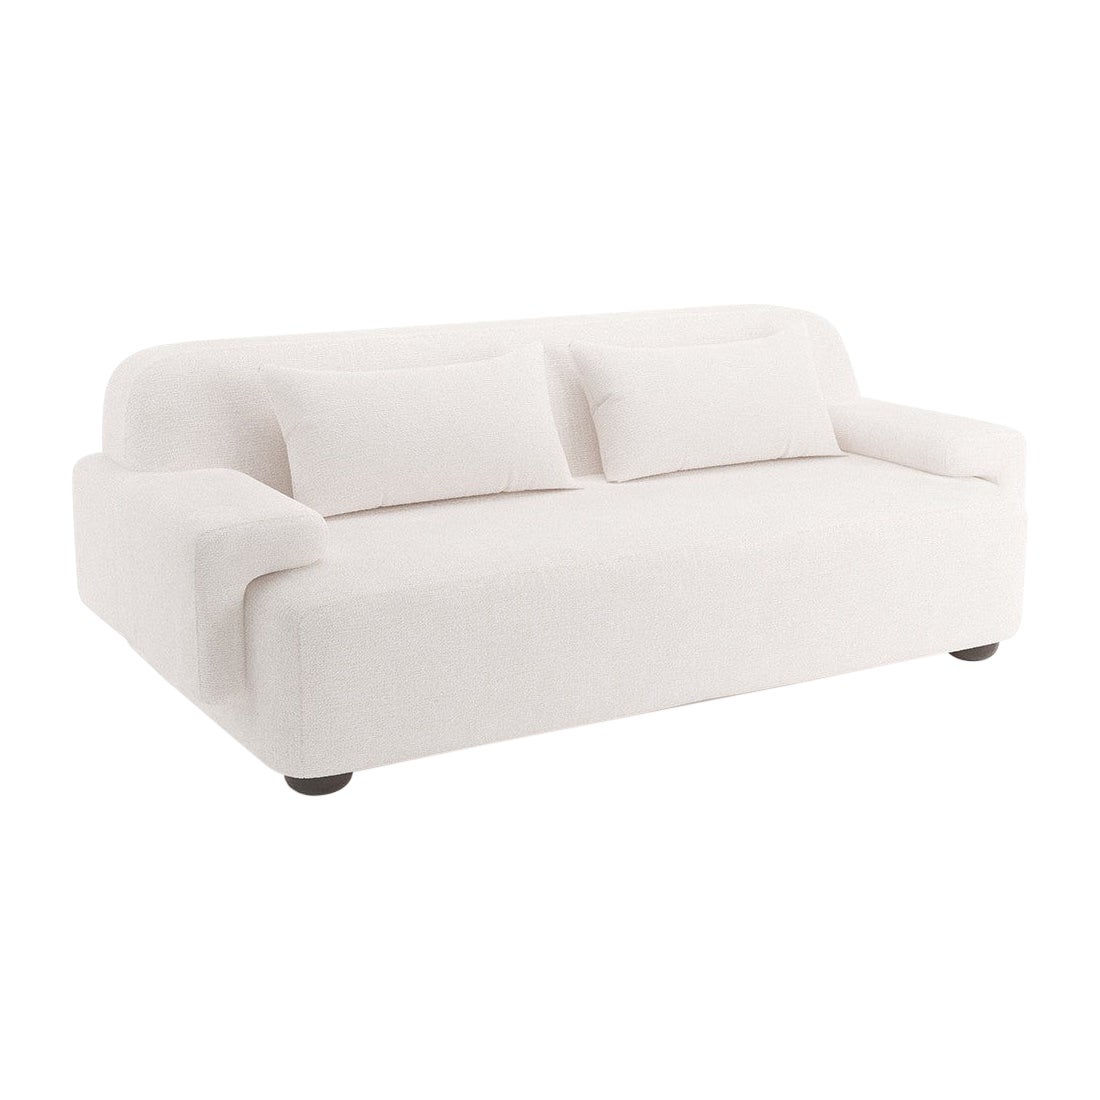 Popus Editions Lena 3 Seater Sofa in Ivory Megeve Fabric with Knit Effect For Sale